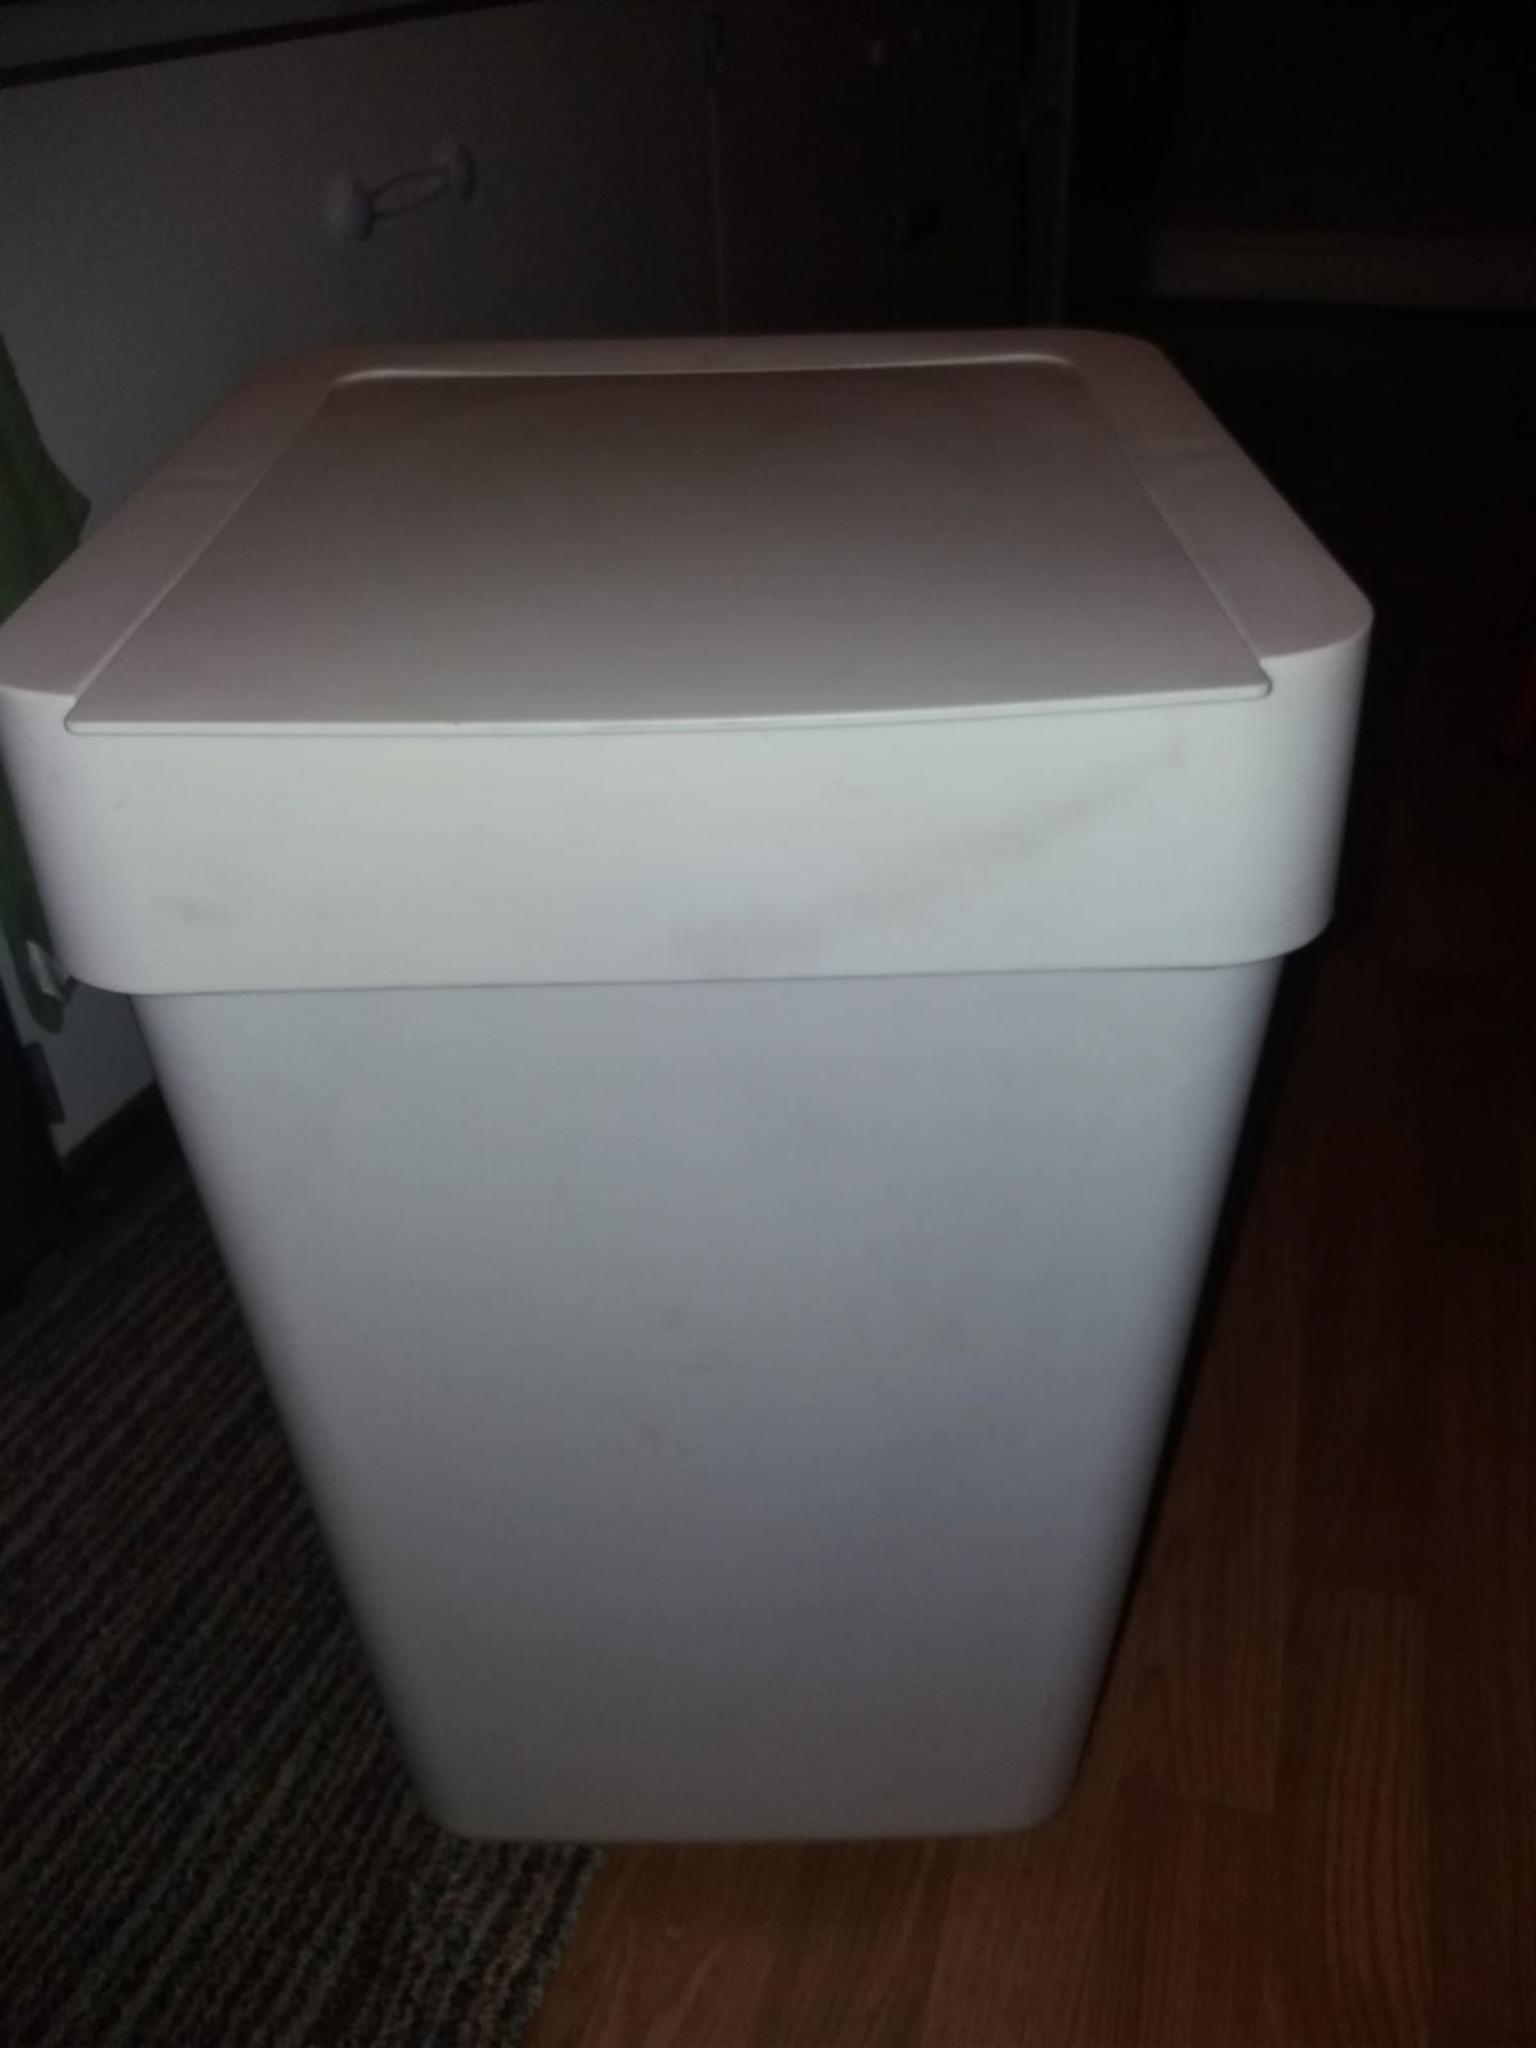 Ikea White Storage Bin In Nw3 London For 5 00 For Sale Shpock